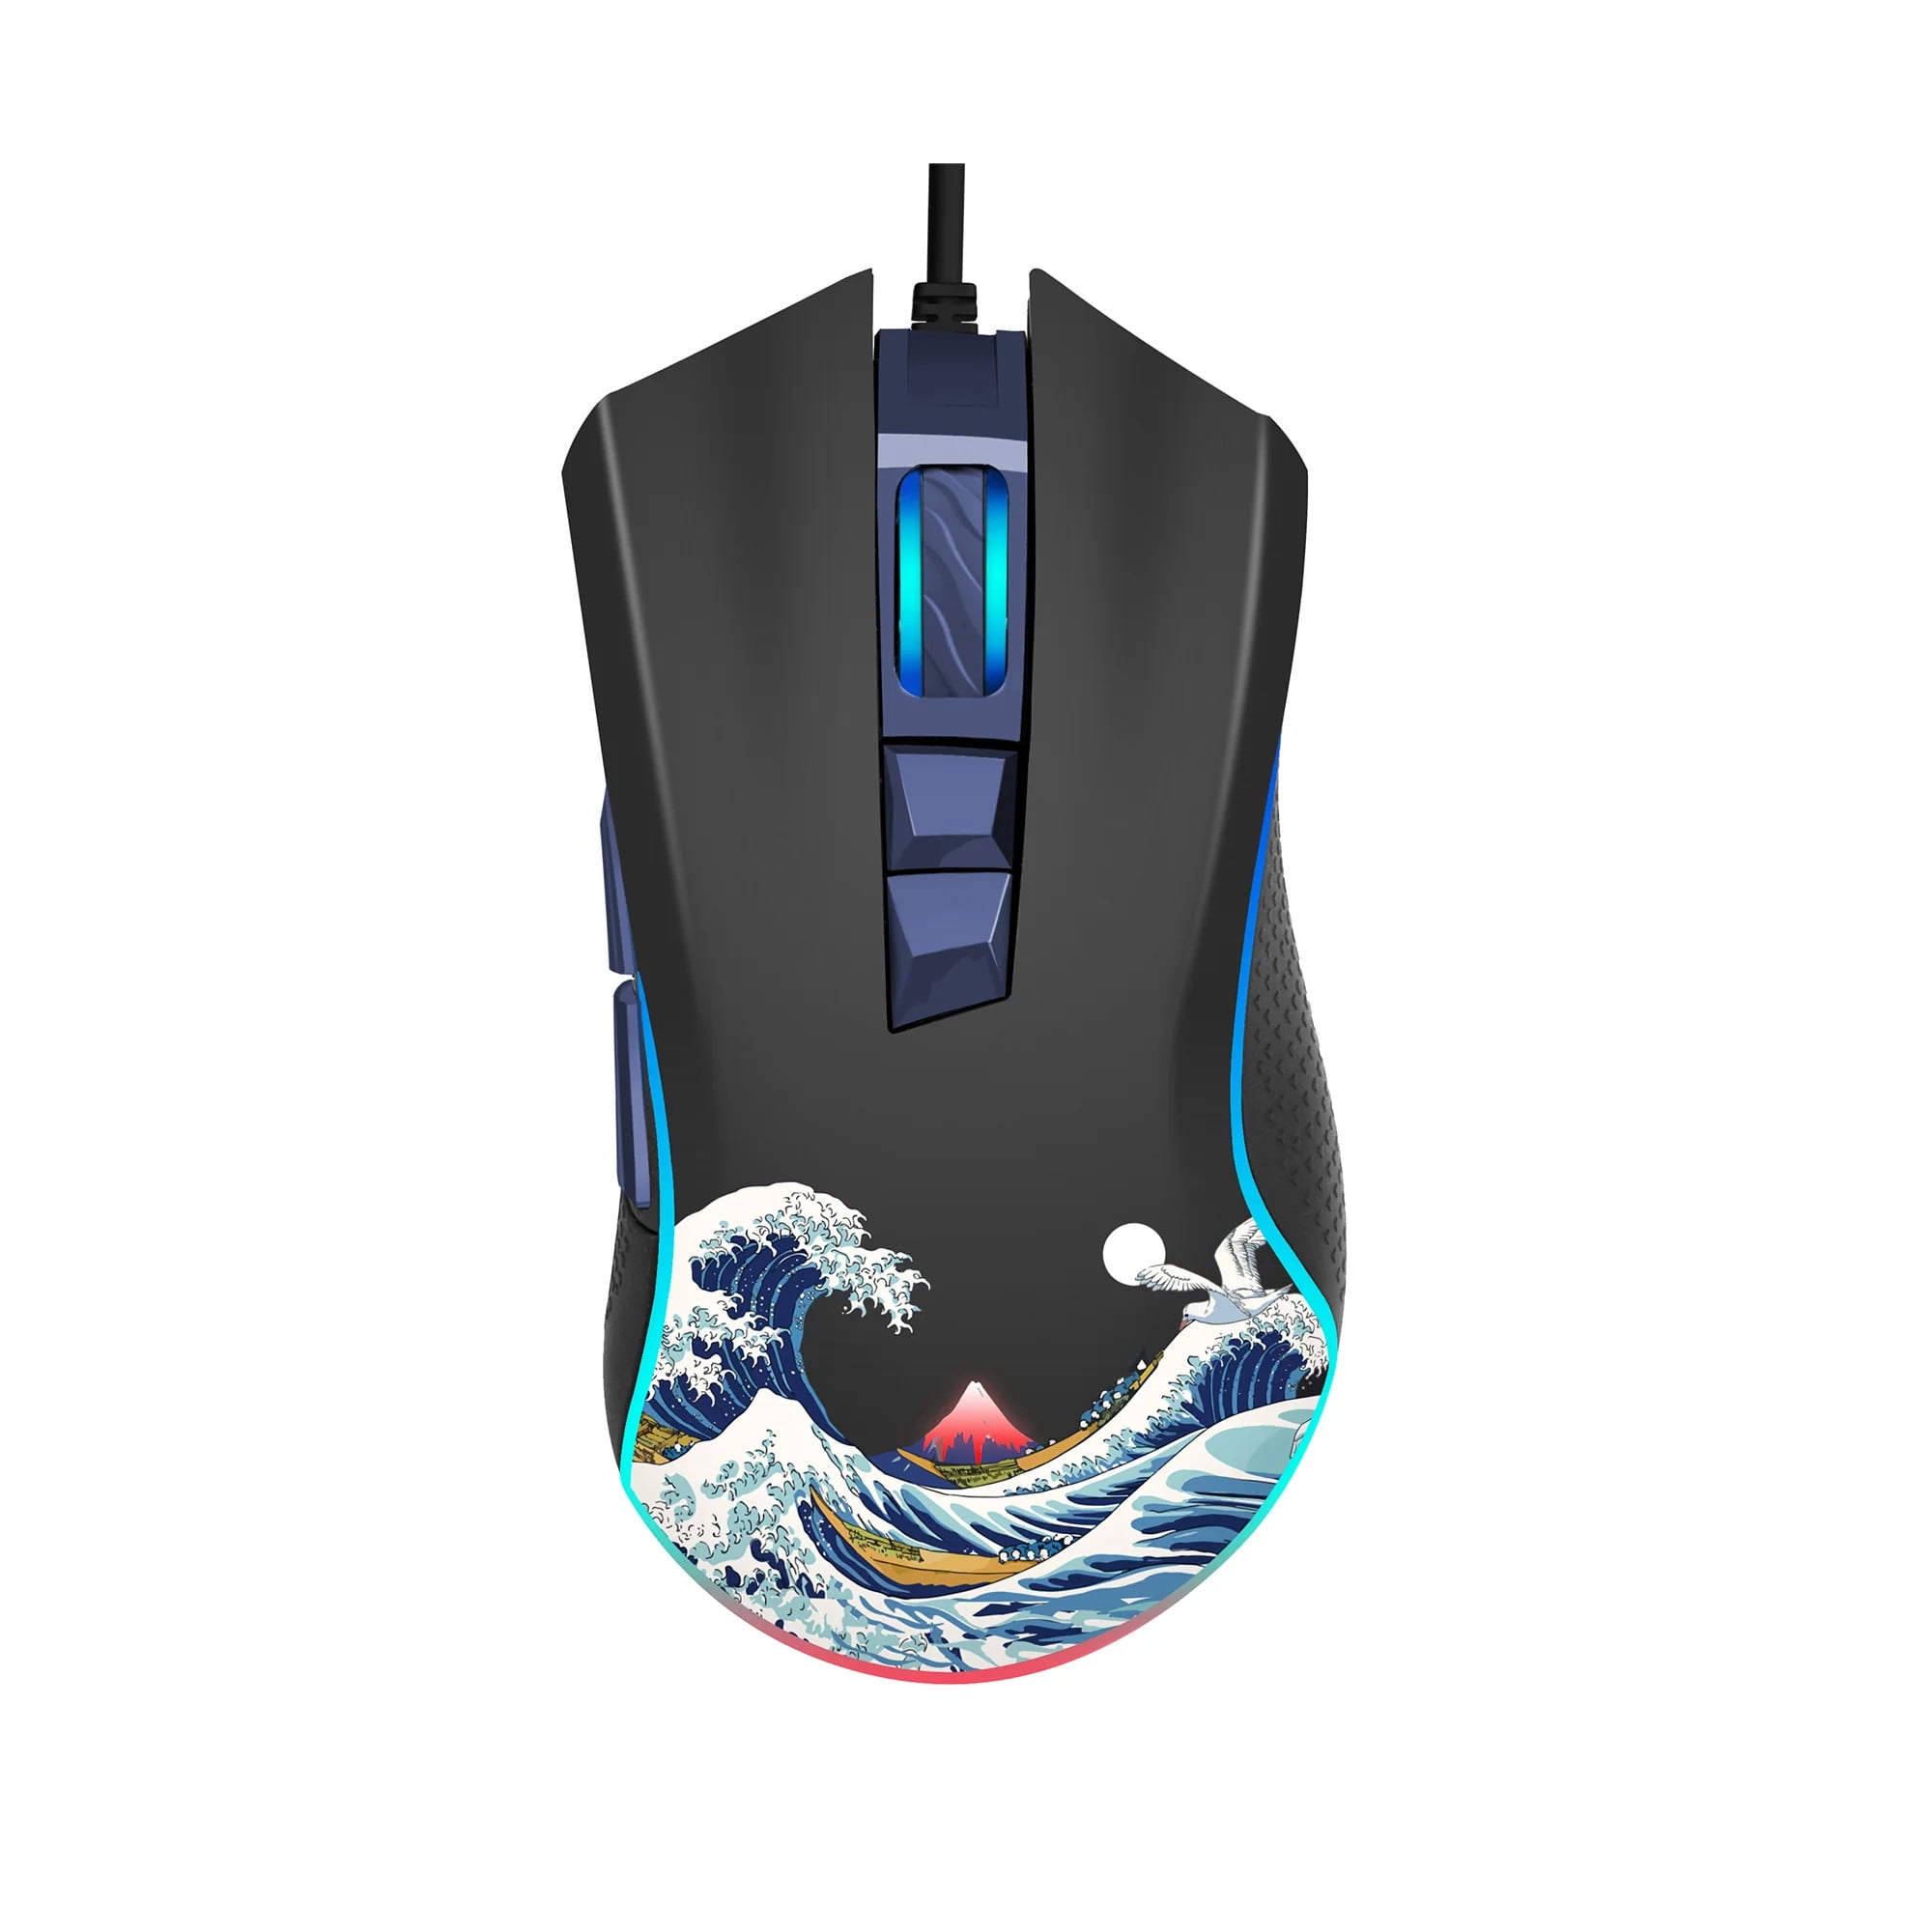 XVX Wired Gaming Mouse Kanagawa Themed,G705 RGB Mouse Backlighting Computer  Mouse for Windows PC Gamers,Black